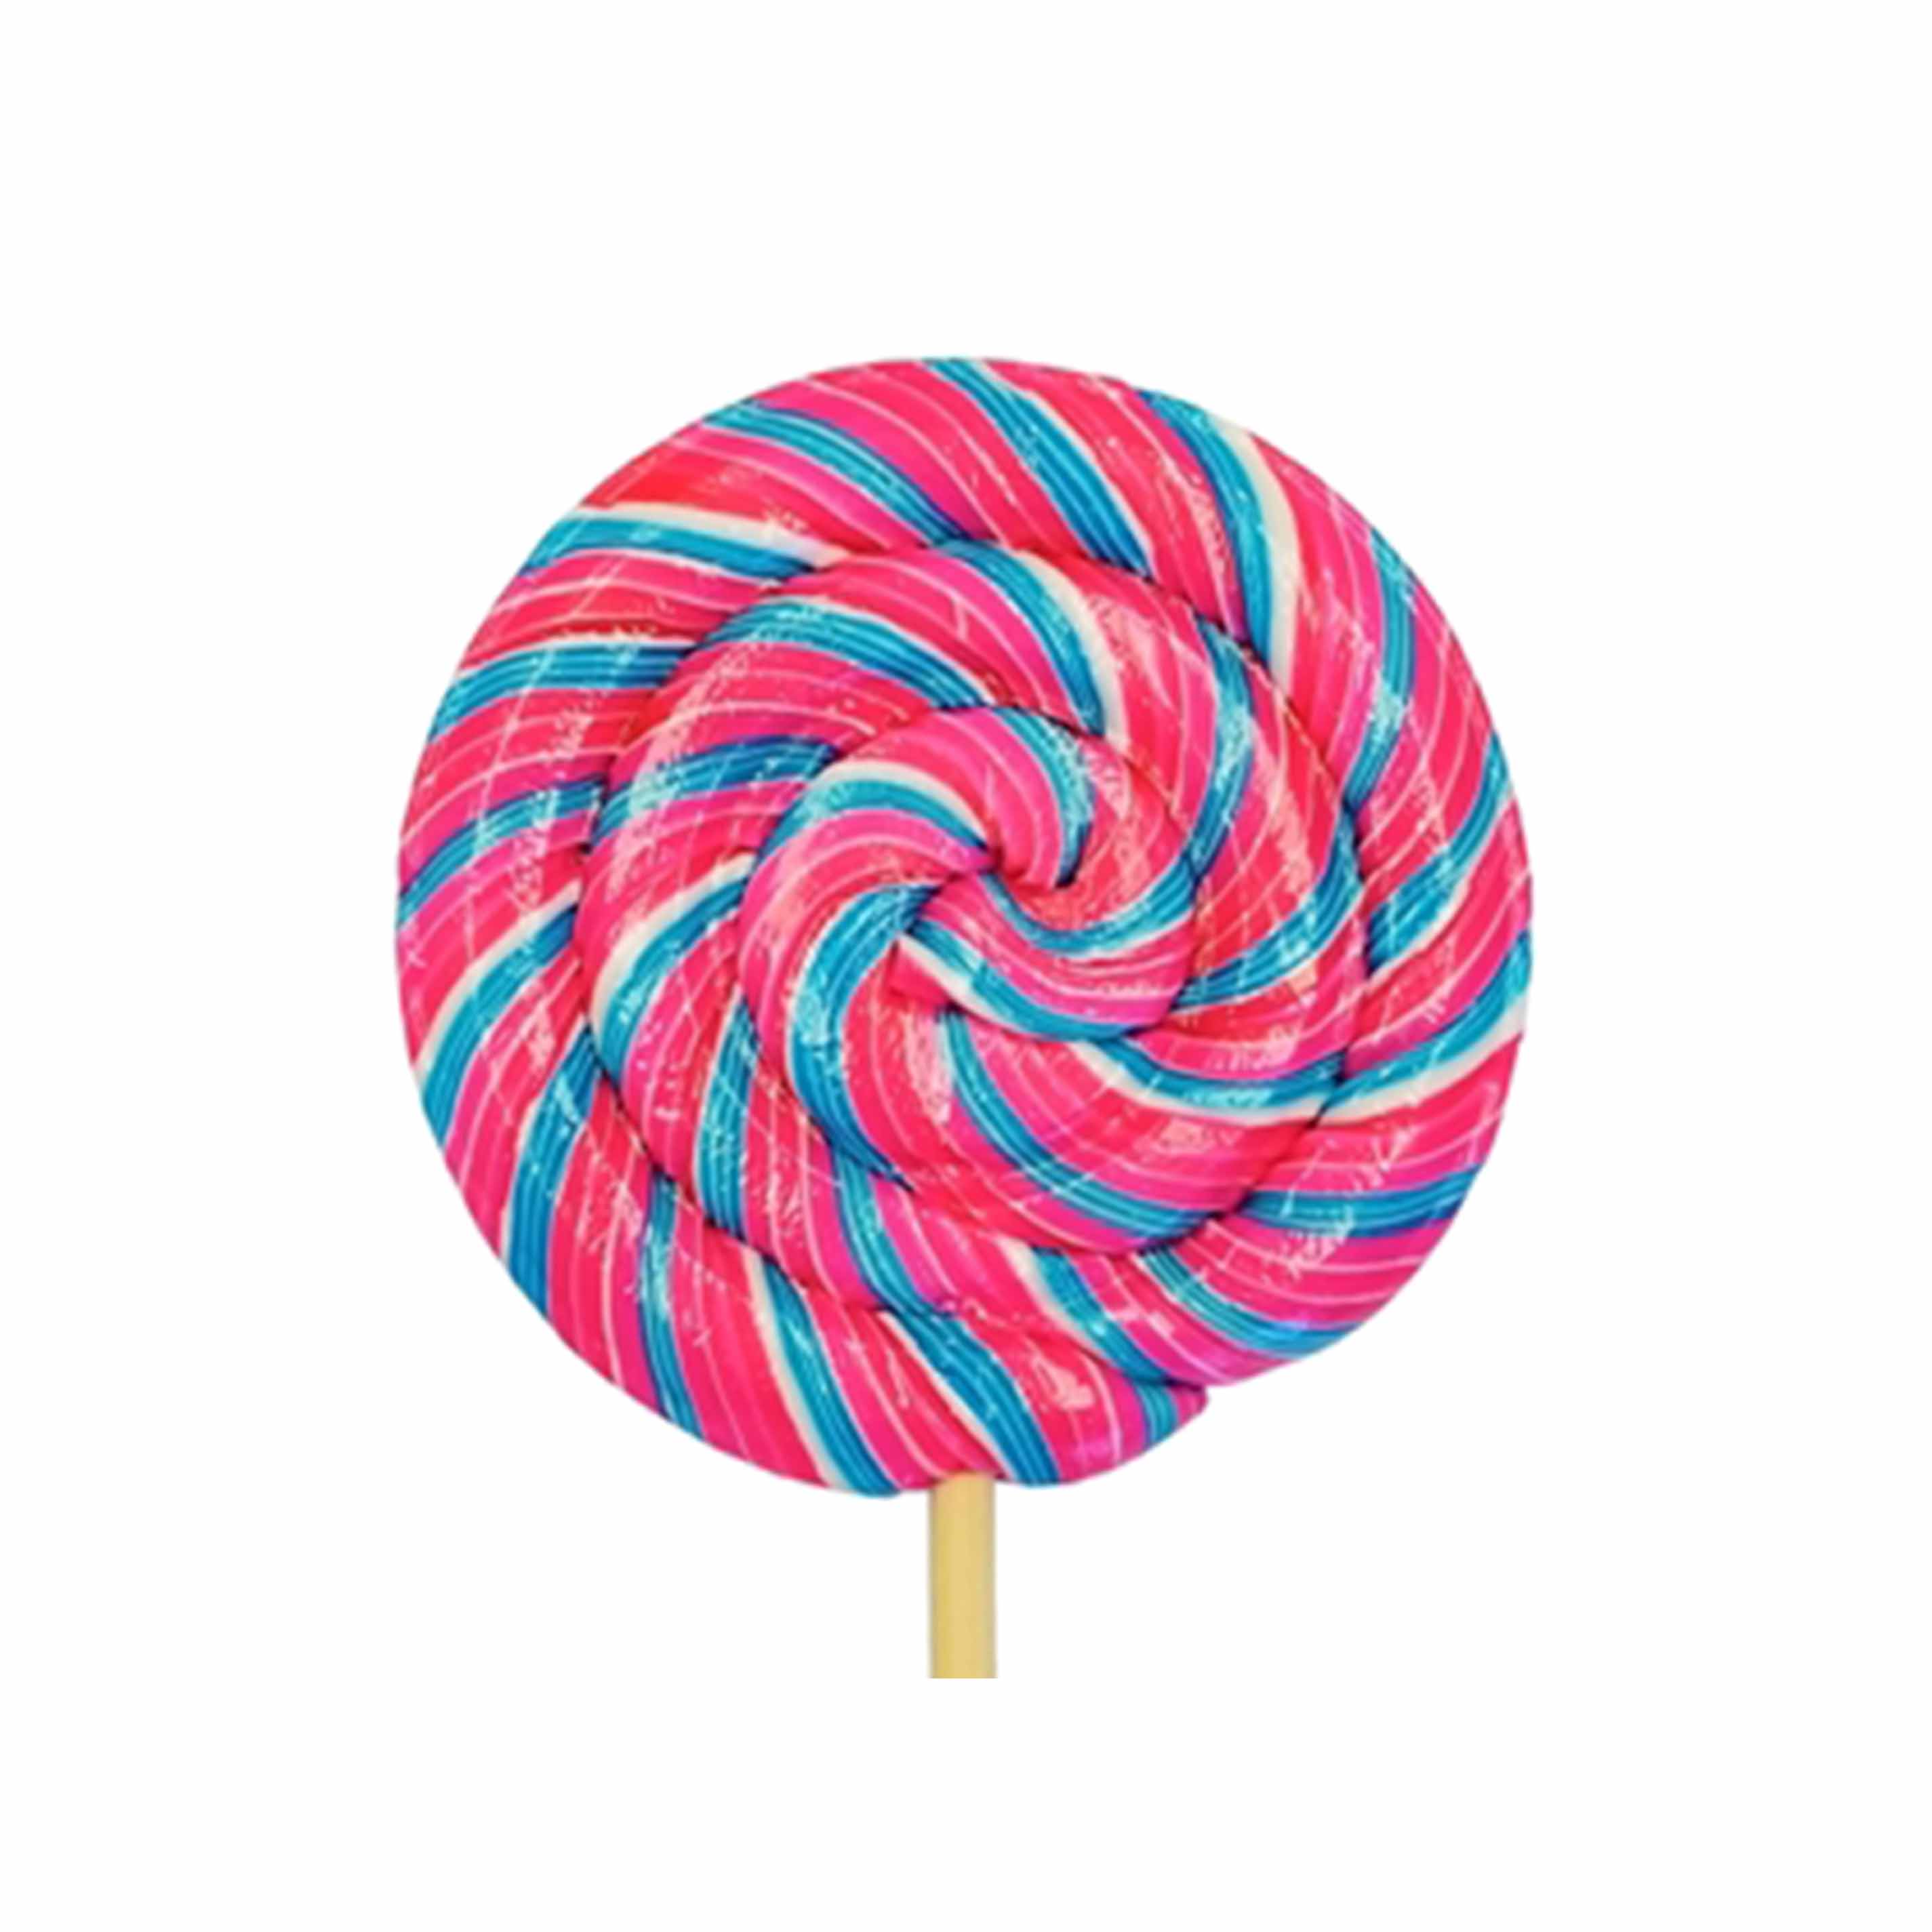 blue and pink bubble-gum swhirly sweet whirls lollipop candy